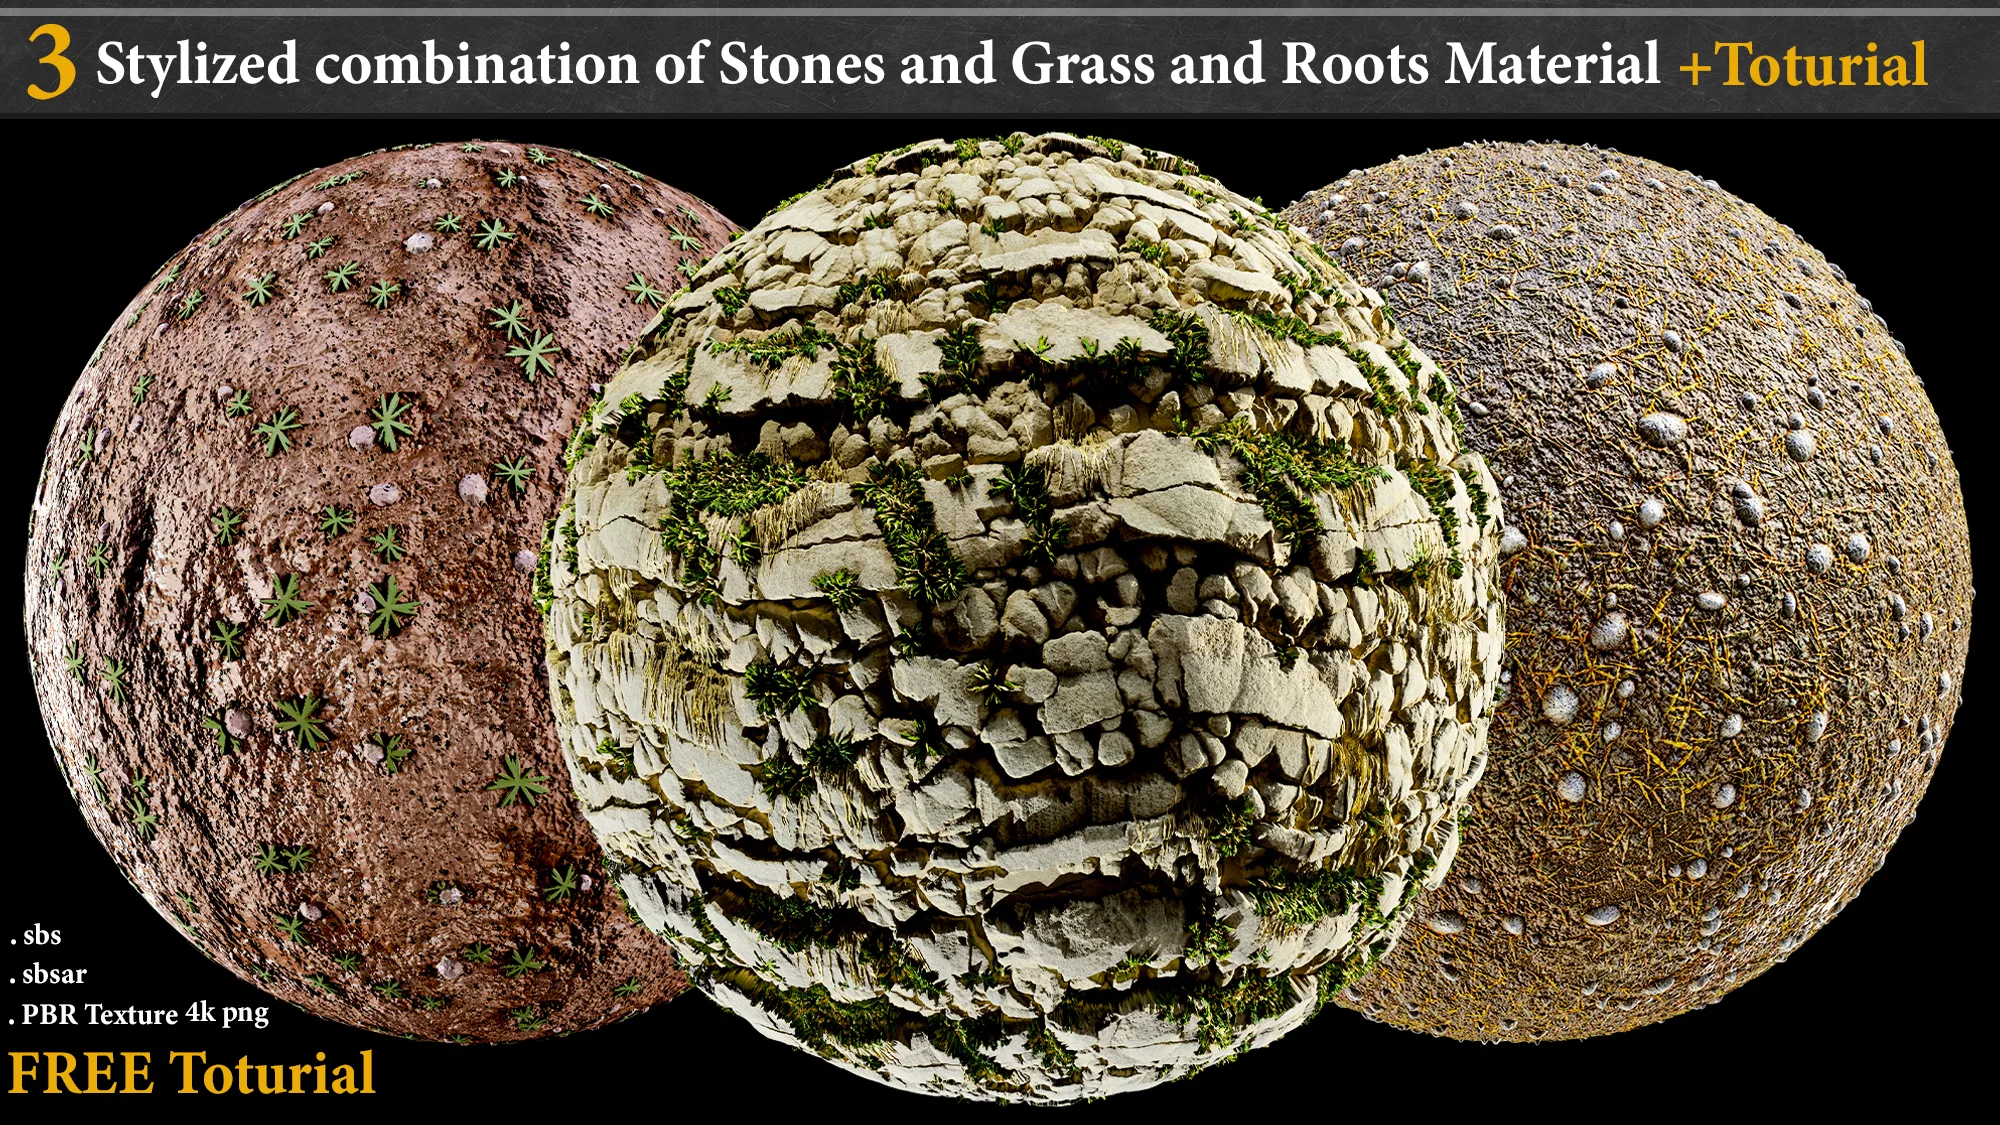 3 Stylized Combination of Stones and Grass and Roots Material _ Substance Designer